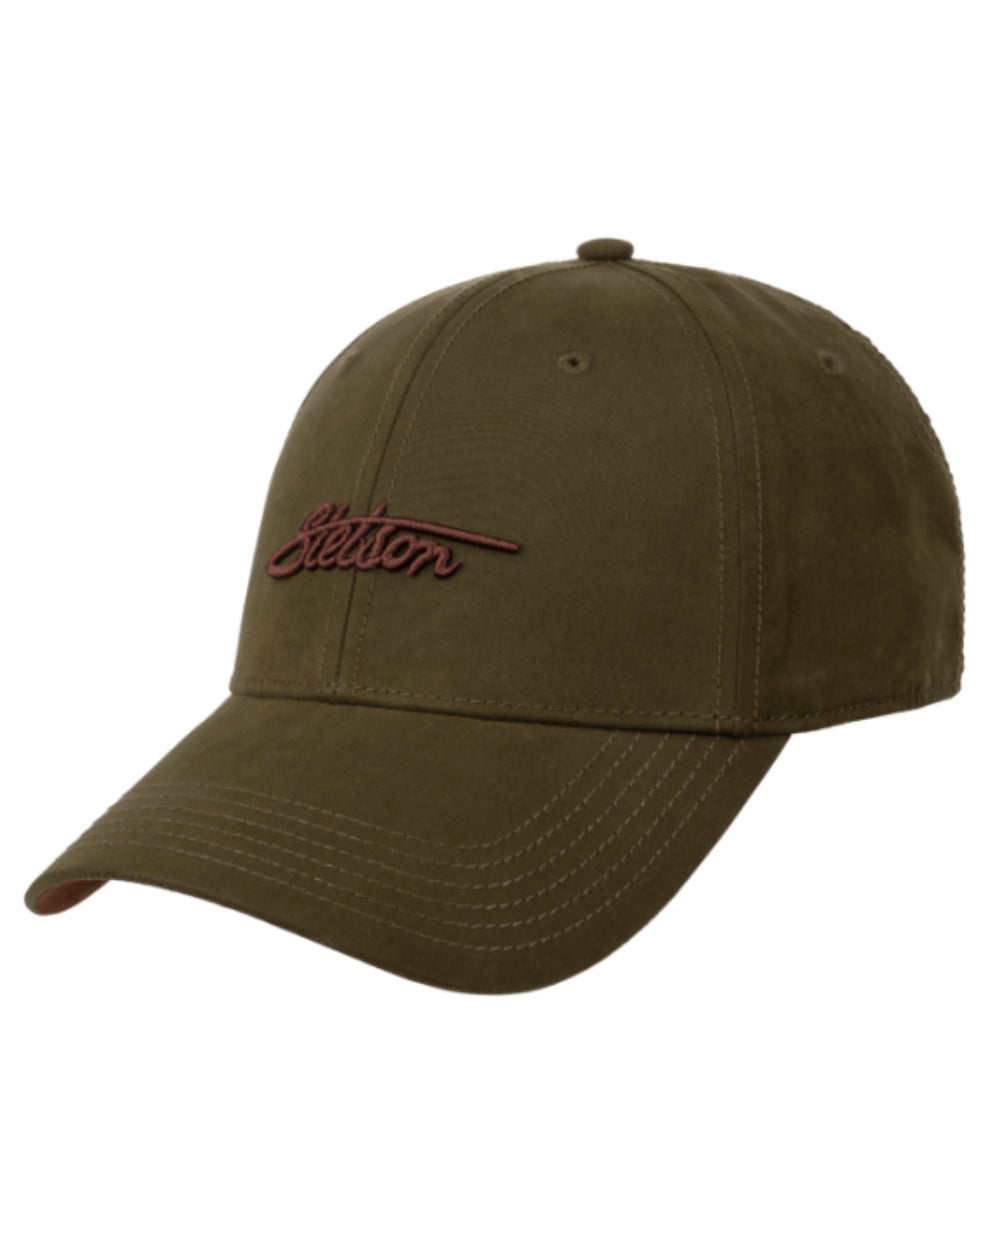 Olive Coloured Stetson Waxed Cotton Baseball Cap On A White Background 